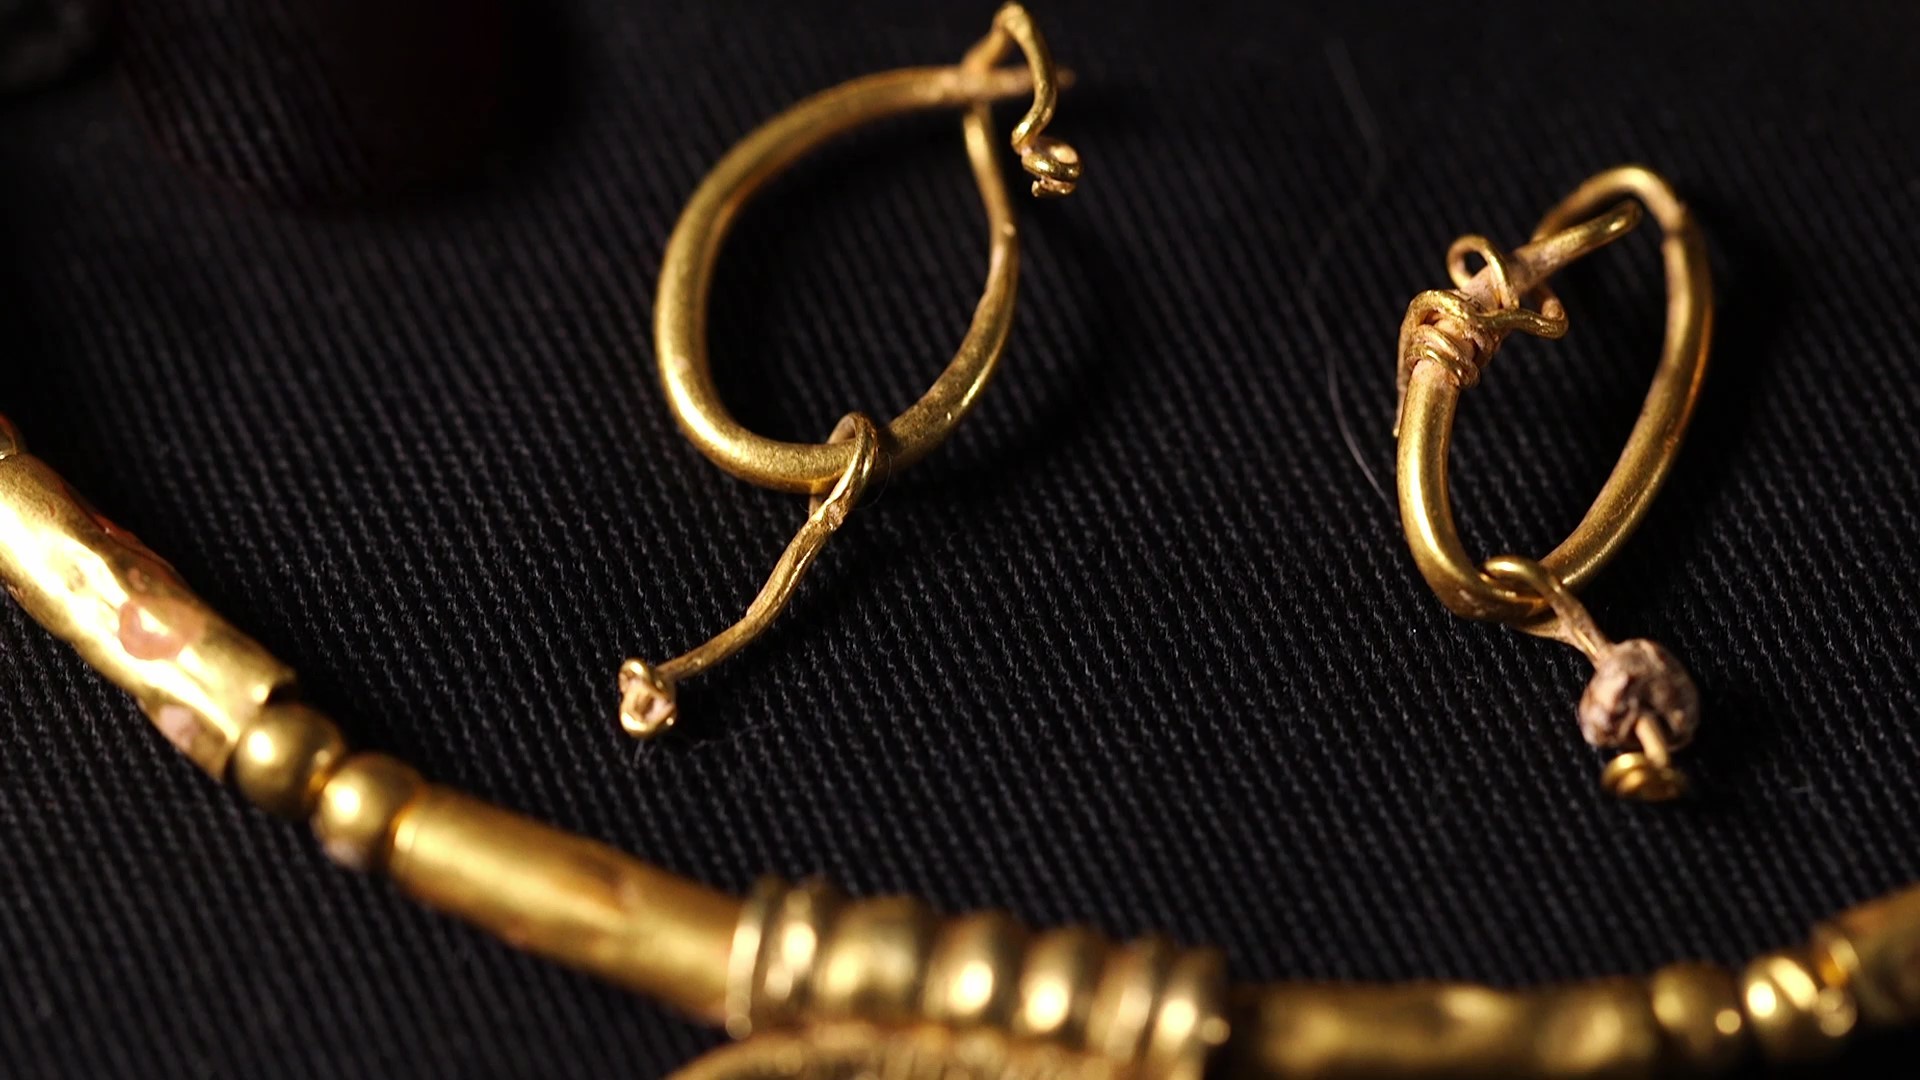 Ancient 'evil eye' jewelry used to protect young girl unveiled in